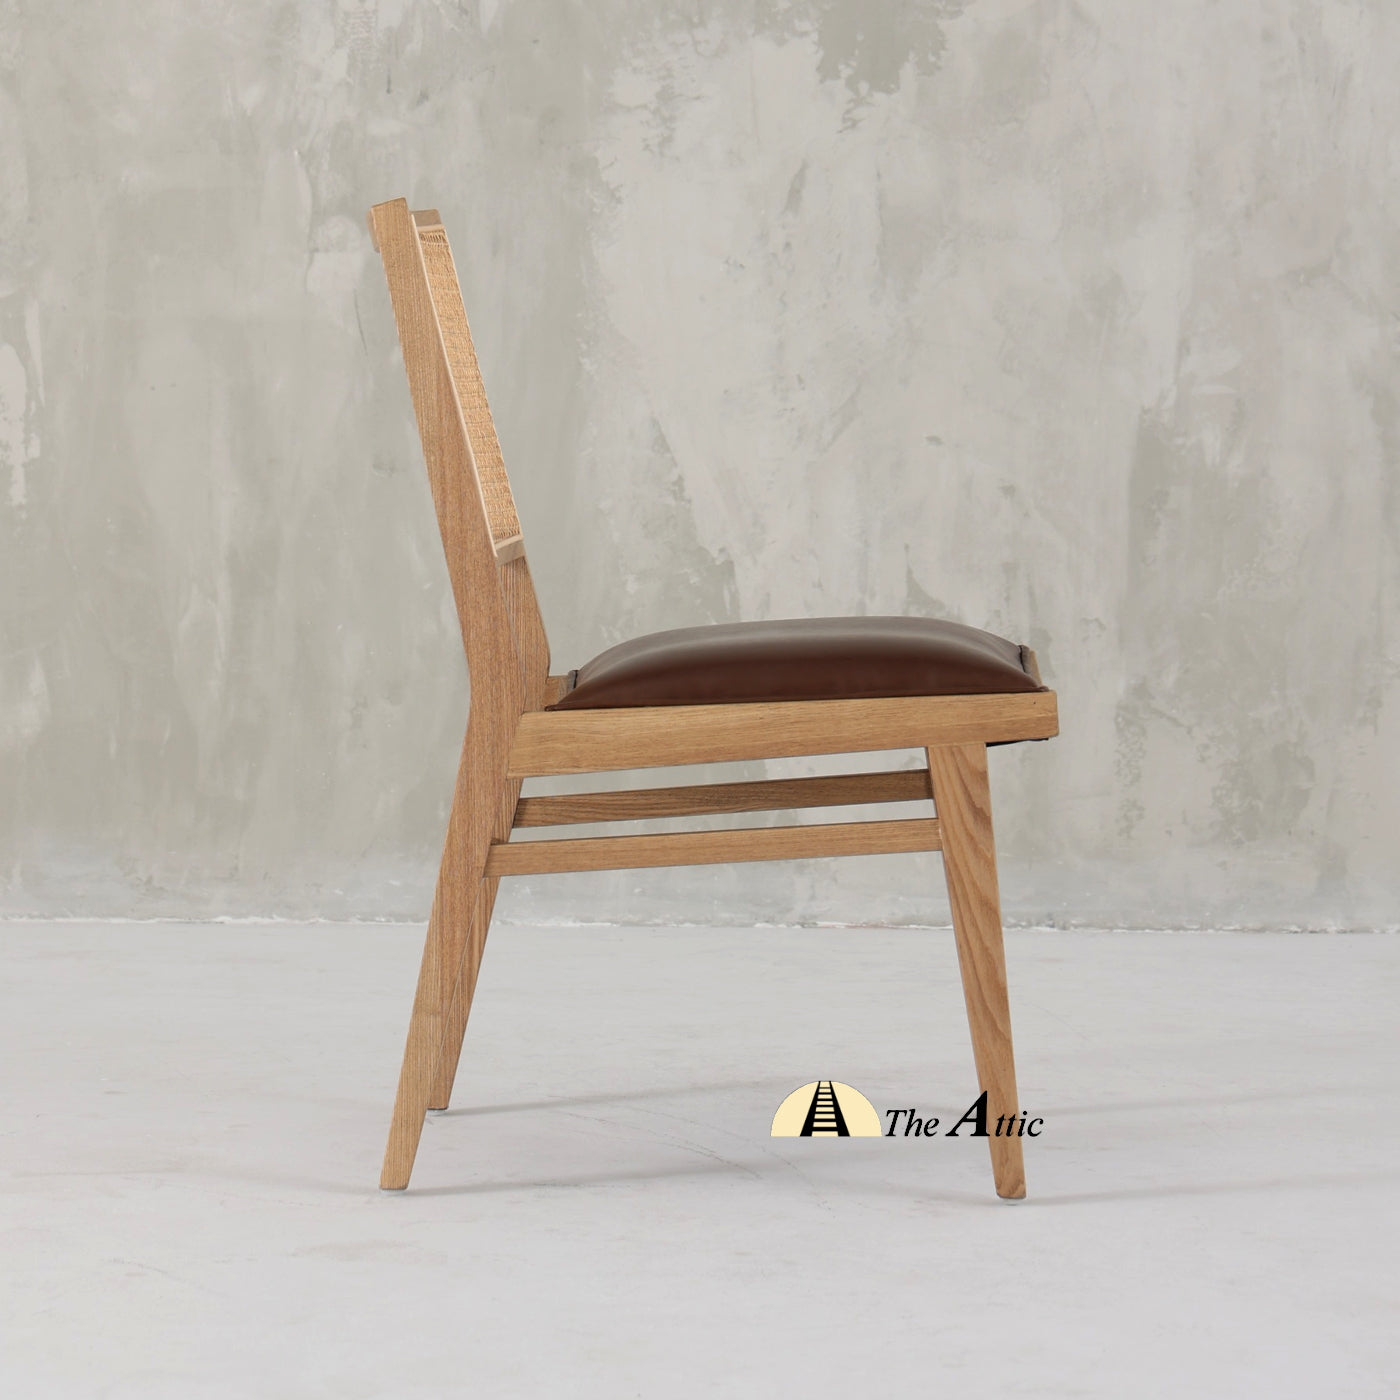 Zurich Oak Wood, Leather and Rattan Dining Chair - The Attic Dubai